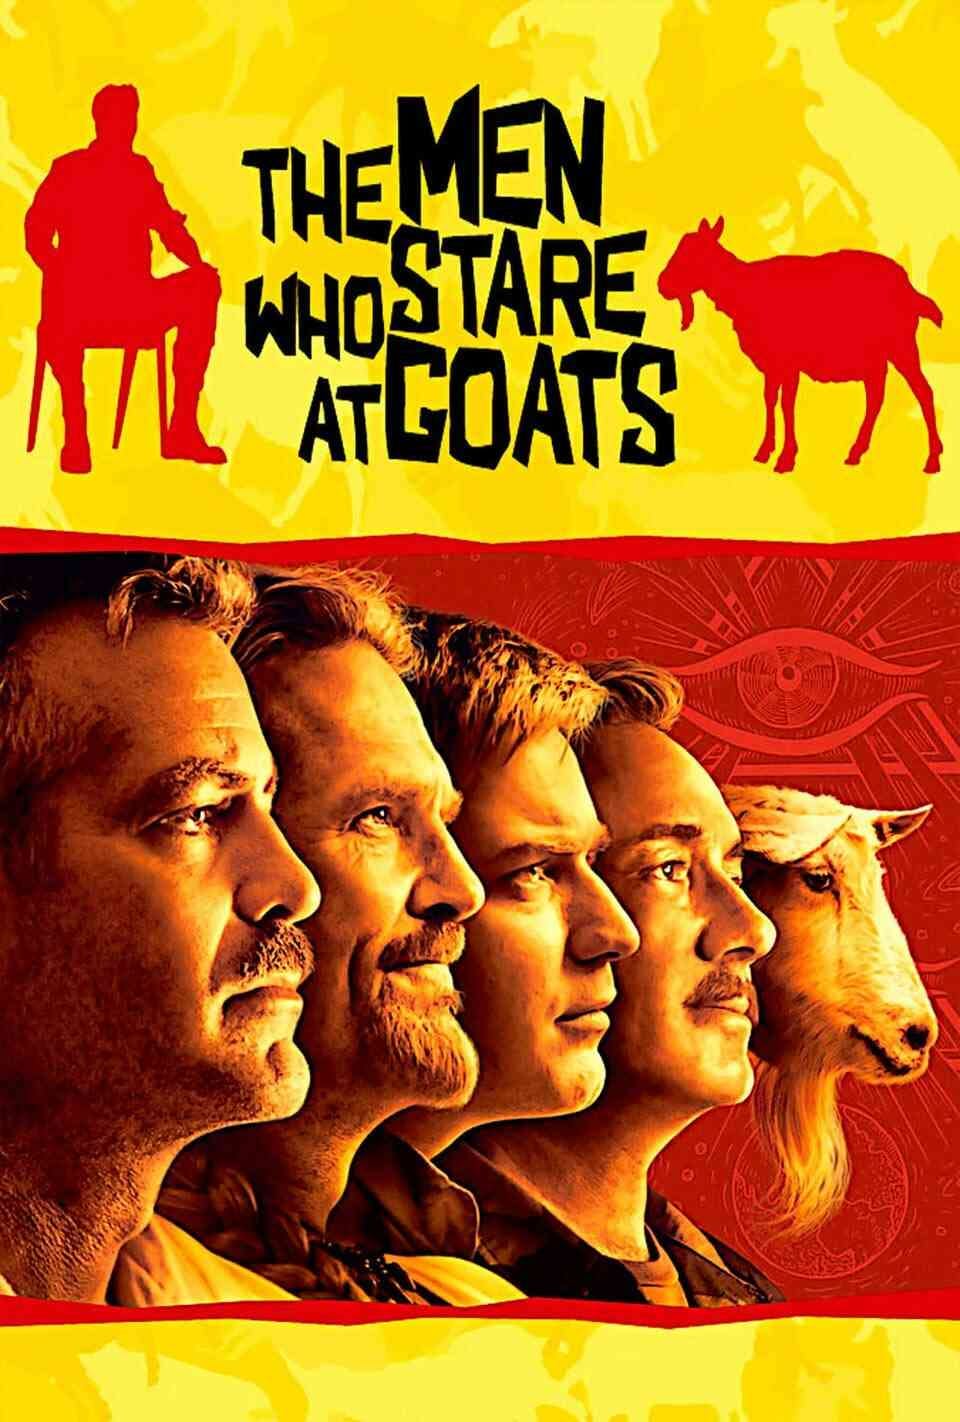 Read The Men Who Stare at Goats screenplay (poster)